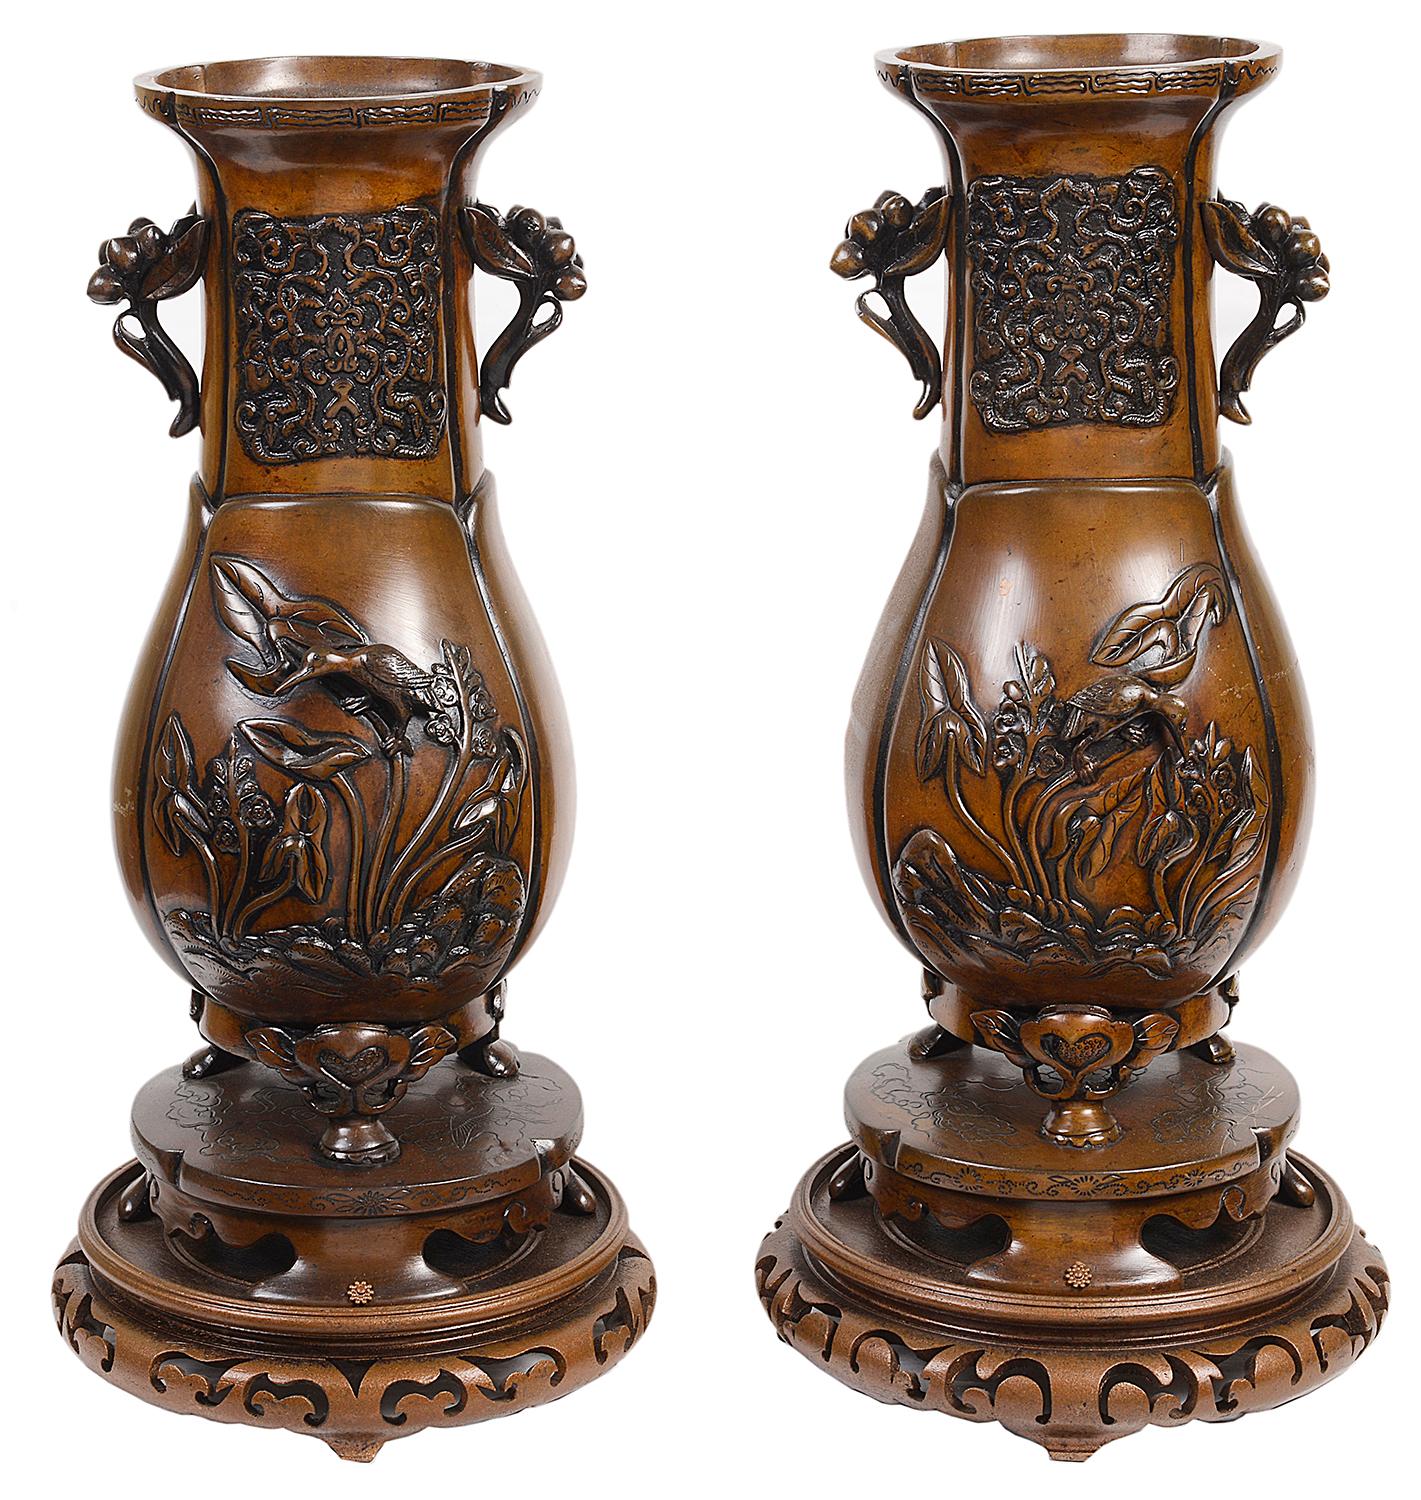 A pair of good quality 19th century Japanese bronze vases on stands, each with raised floral and bird relief, mounted on bronze and carved wood stands.